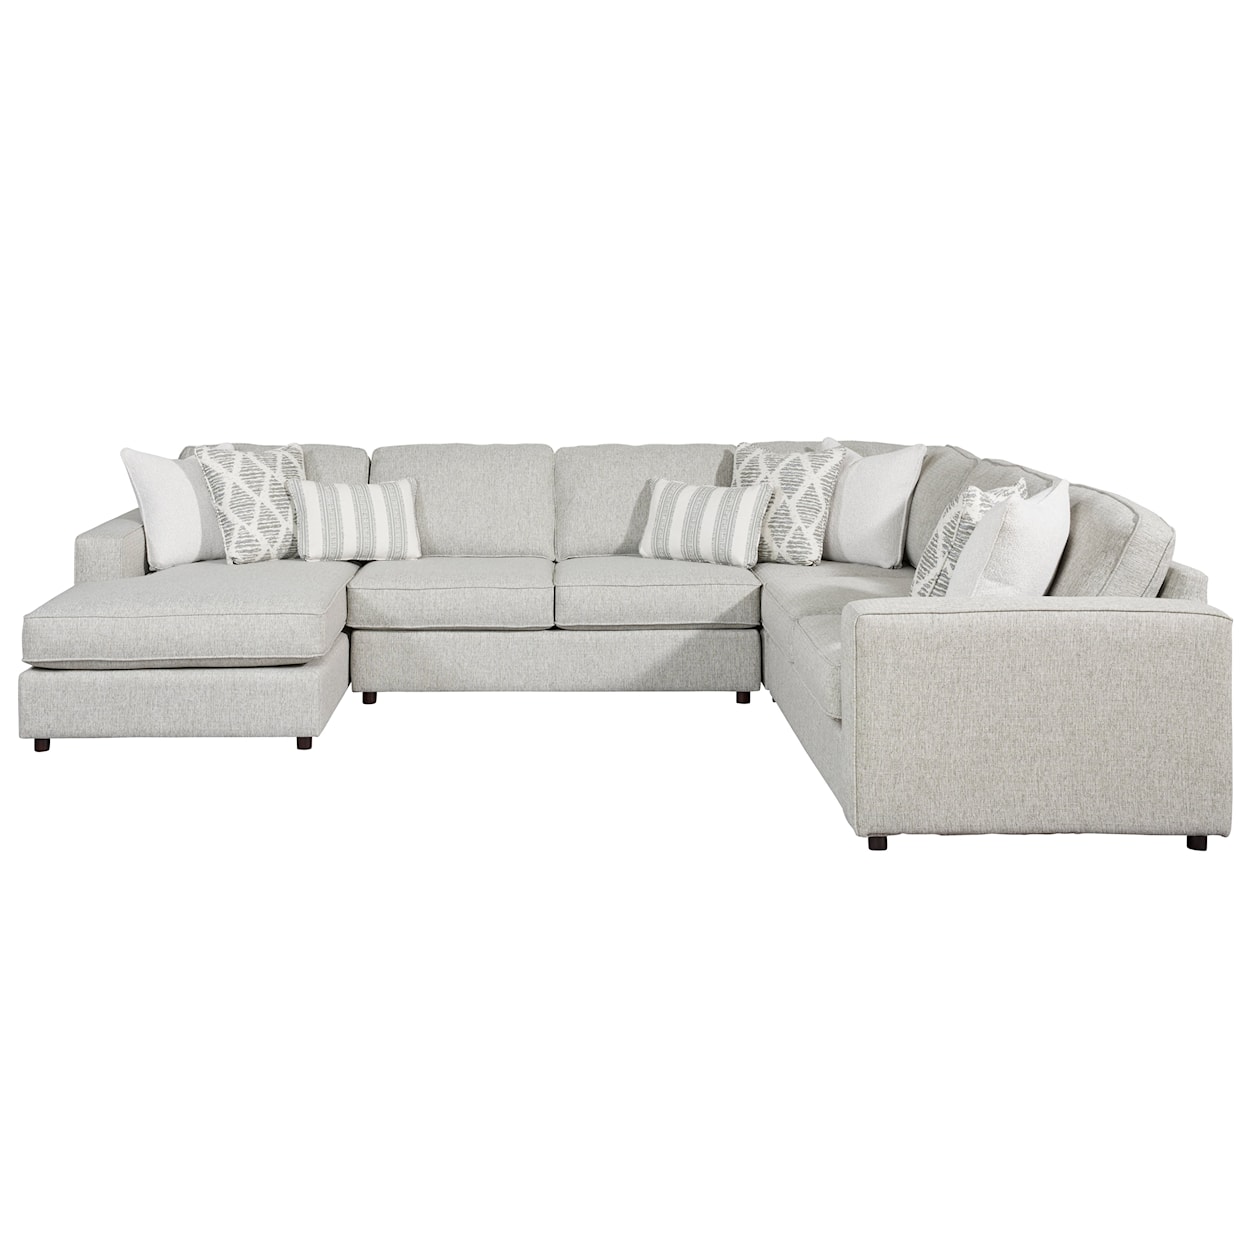 Fusion Furniture 2061 DURANGO FOAM Sectional with Left Chaise